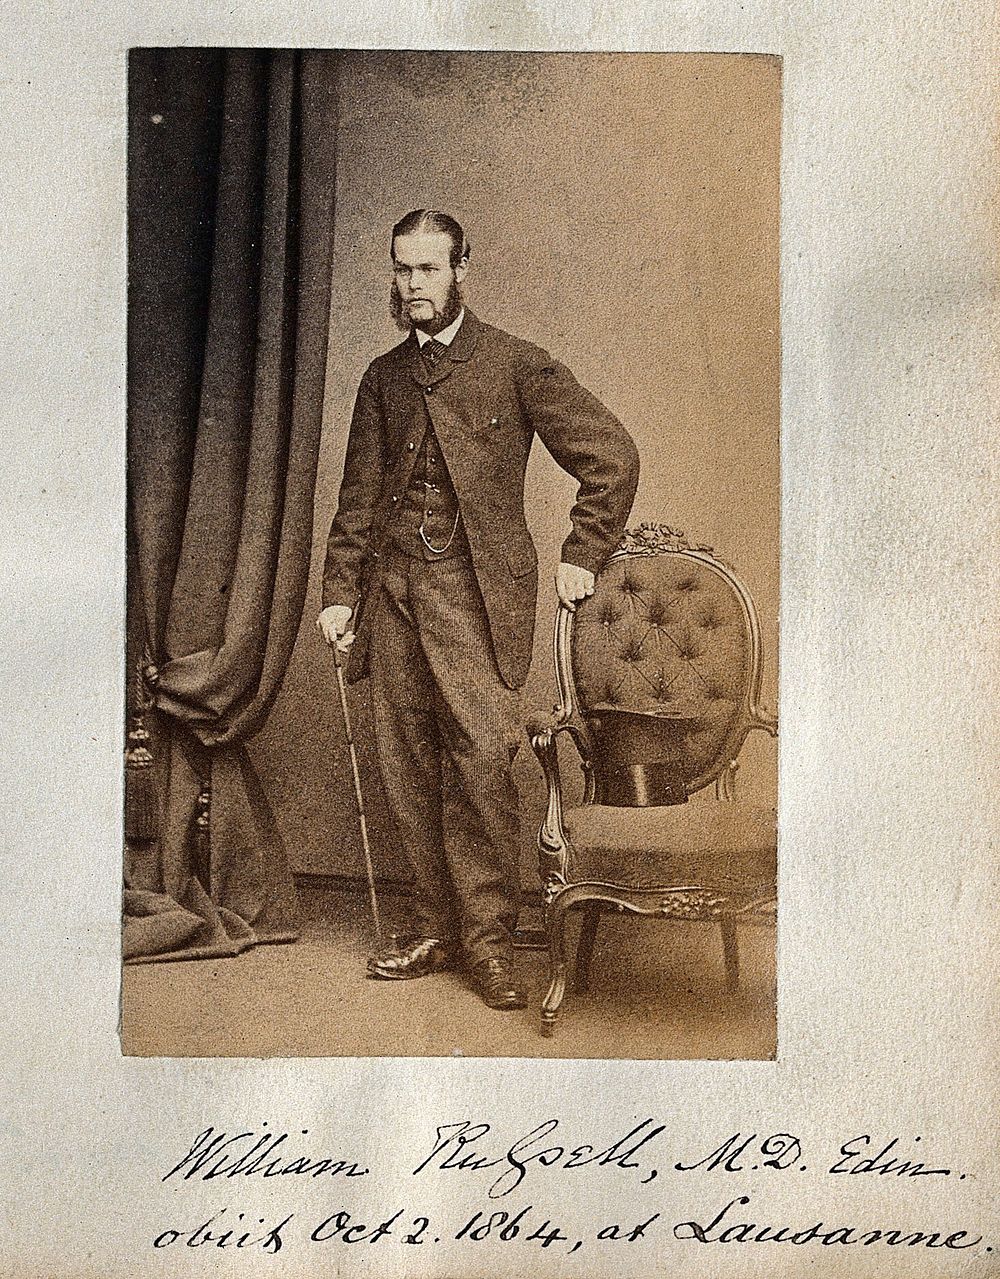 William Russell. Photograph, 1864.